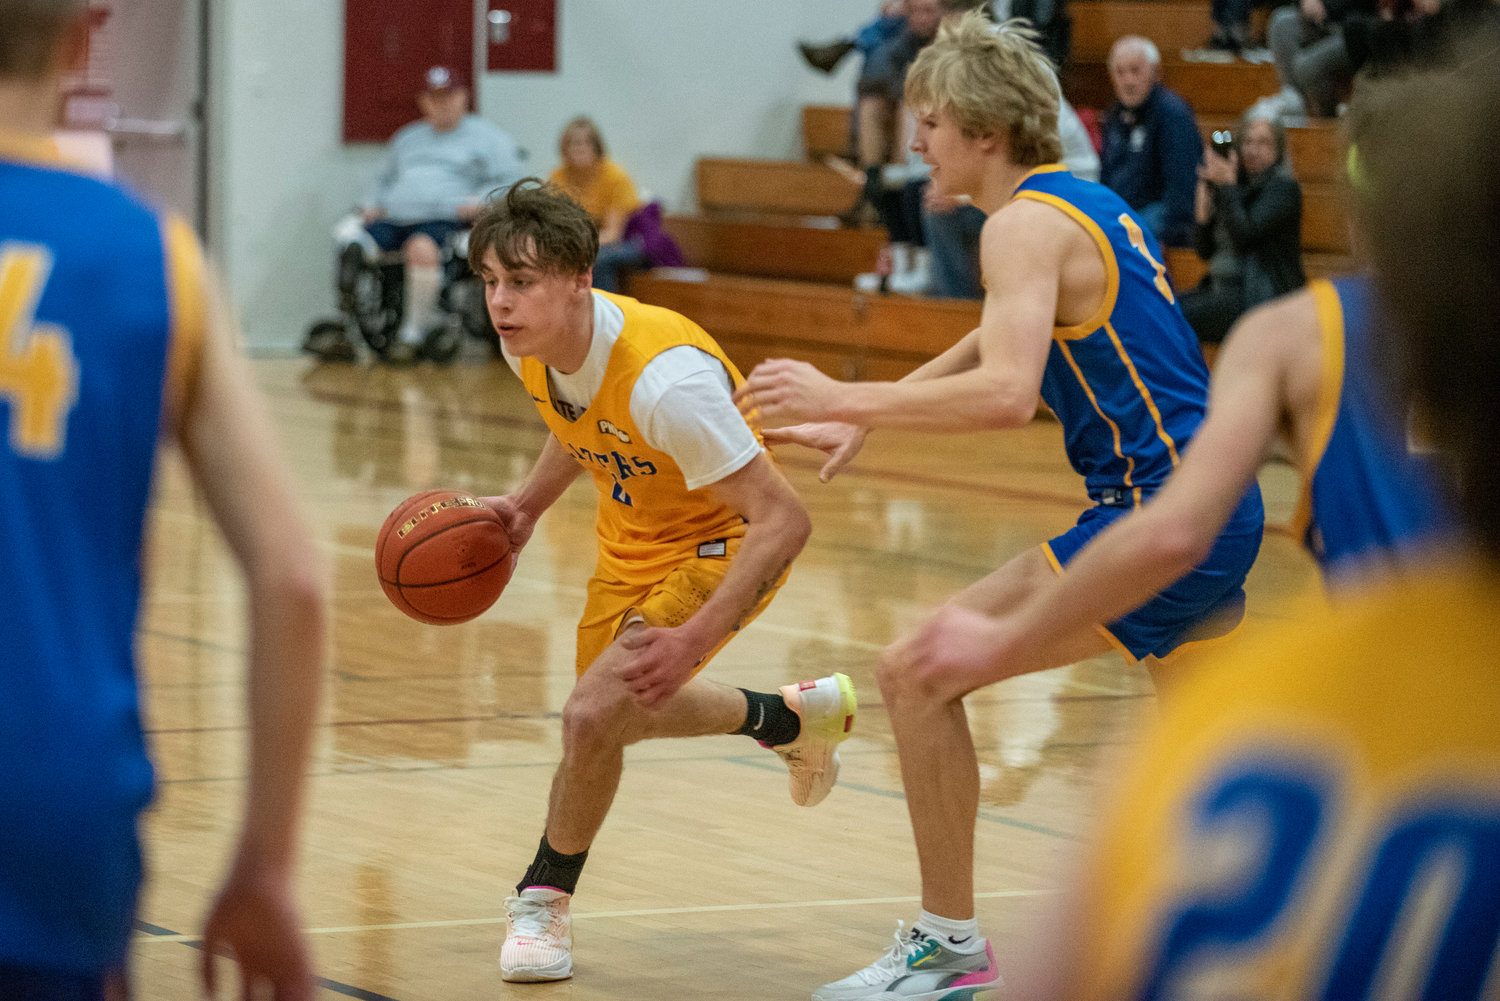 Morton-White Pass' Leytan Collette looks for an opening during the SWW Senior All-Star Game on March 26.